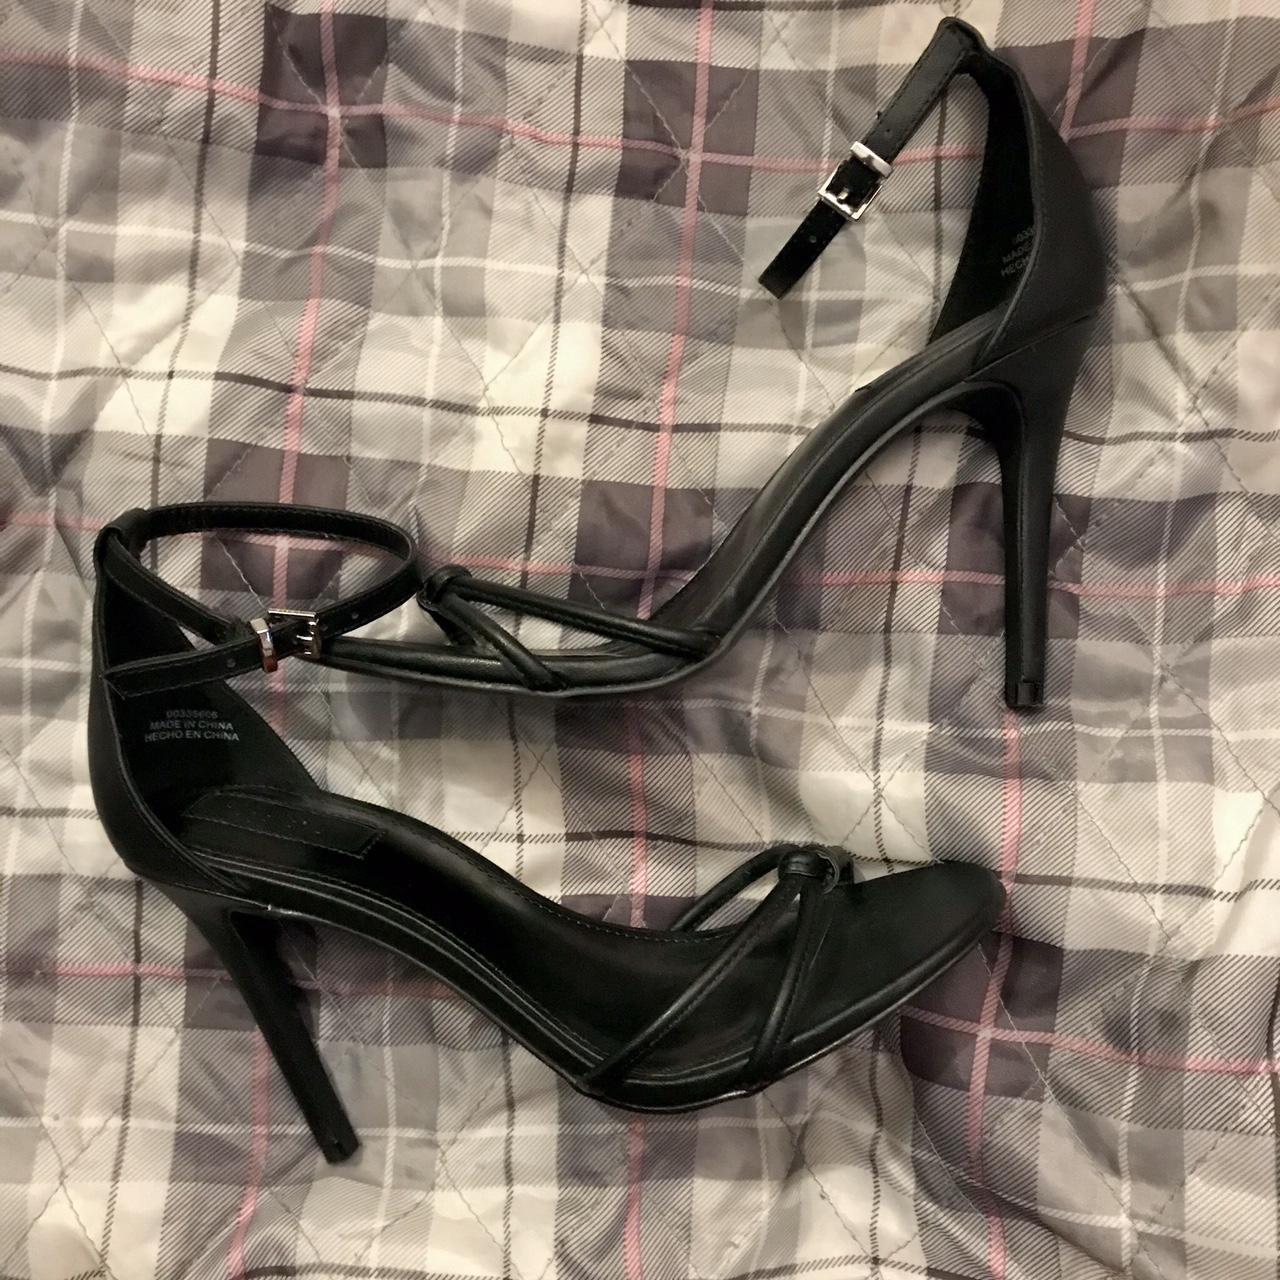 4” heel. Worn once for a photo shoot! - Depop